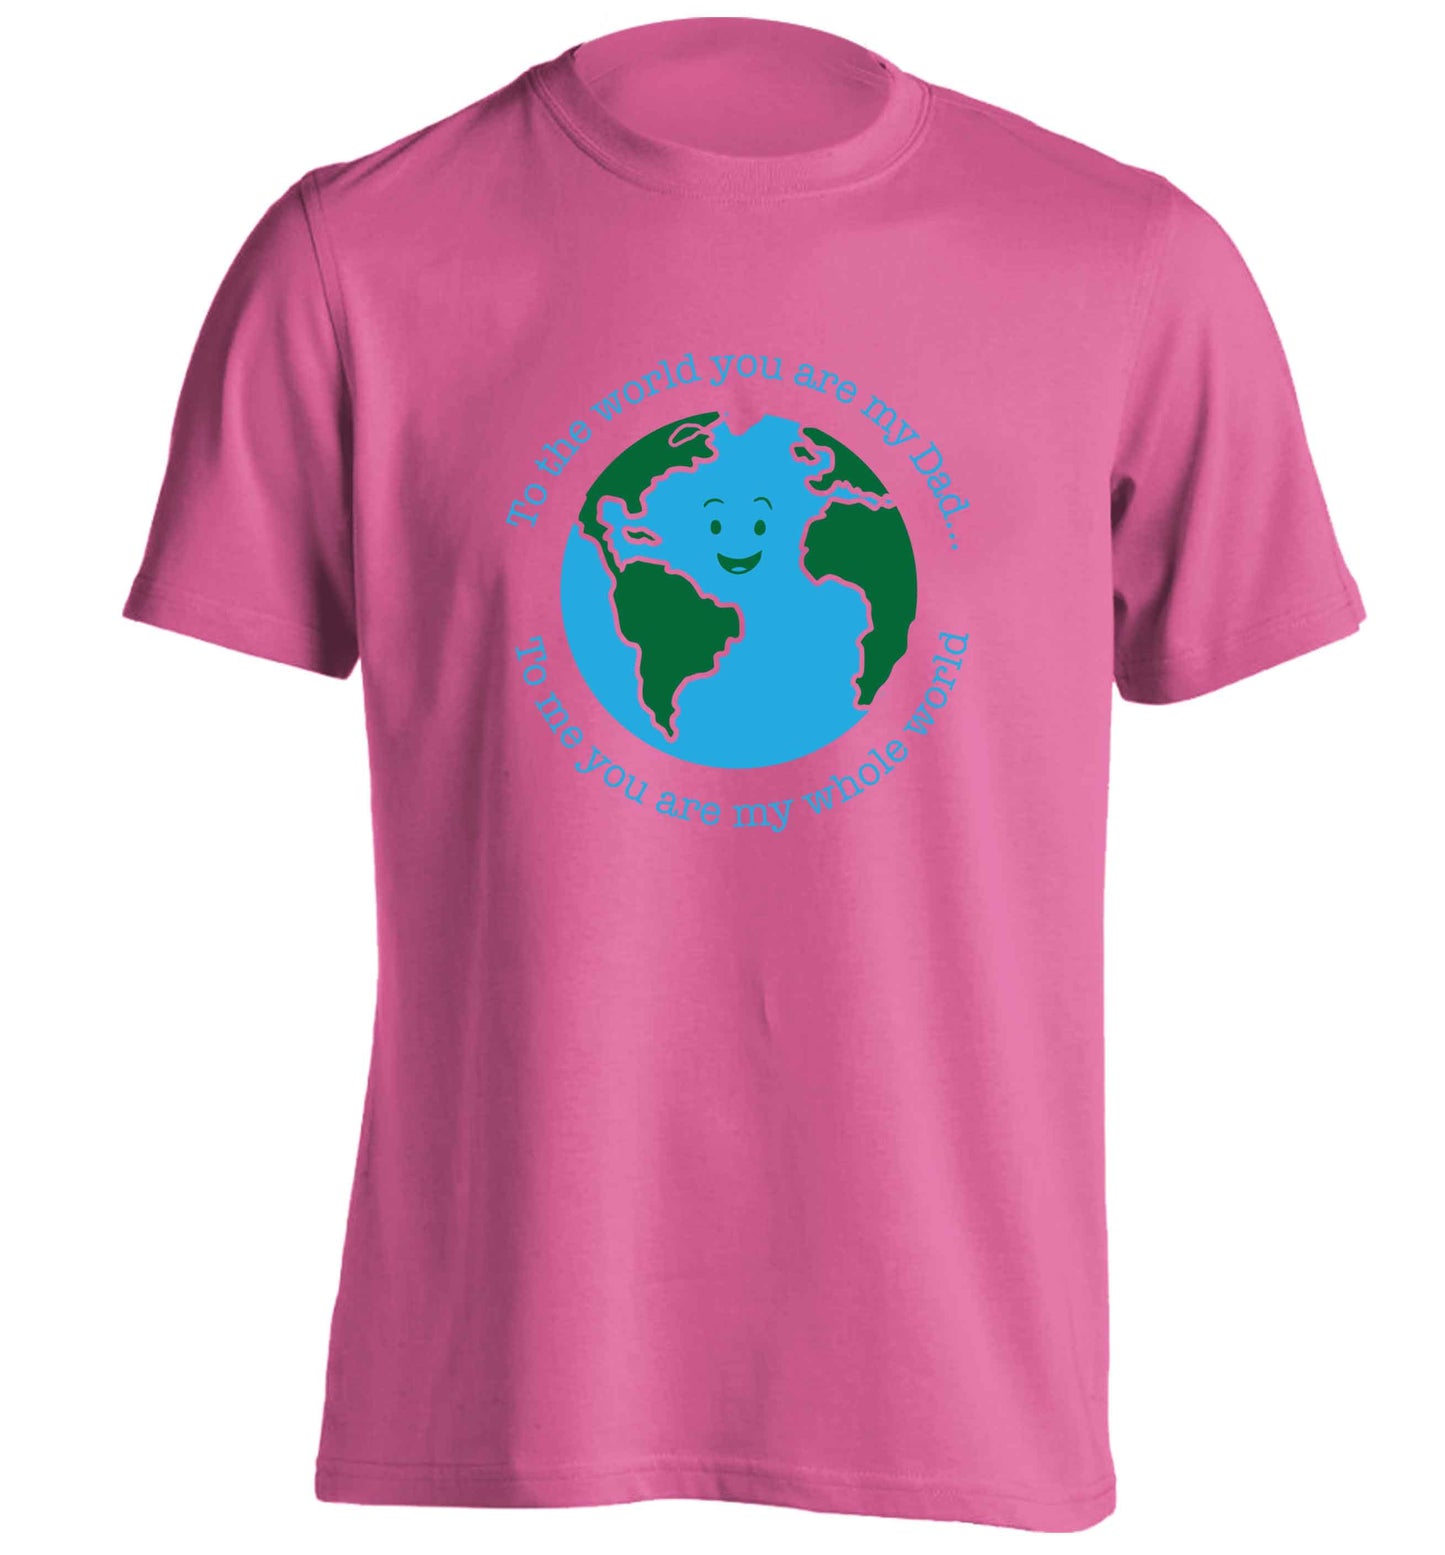 To the world you are my dad, to me you are my whole world adults unisex pink Tshirt 2XL